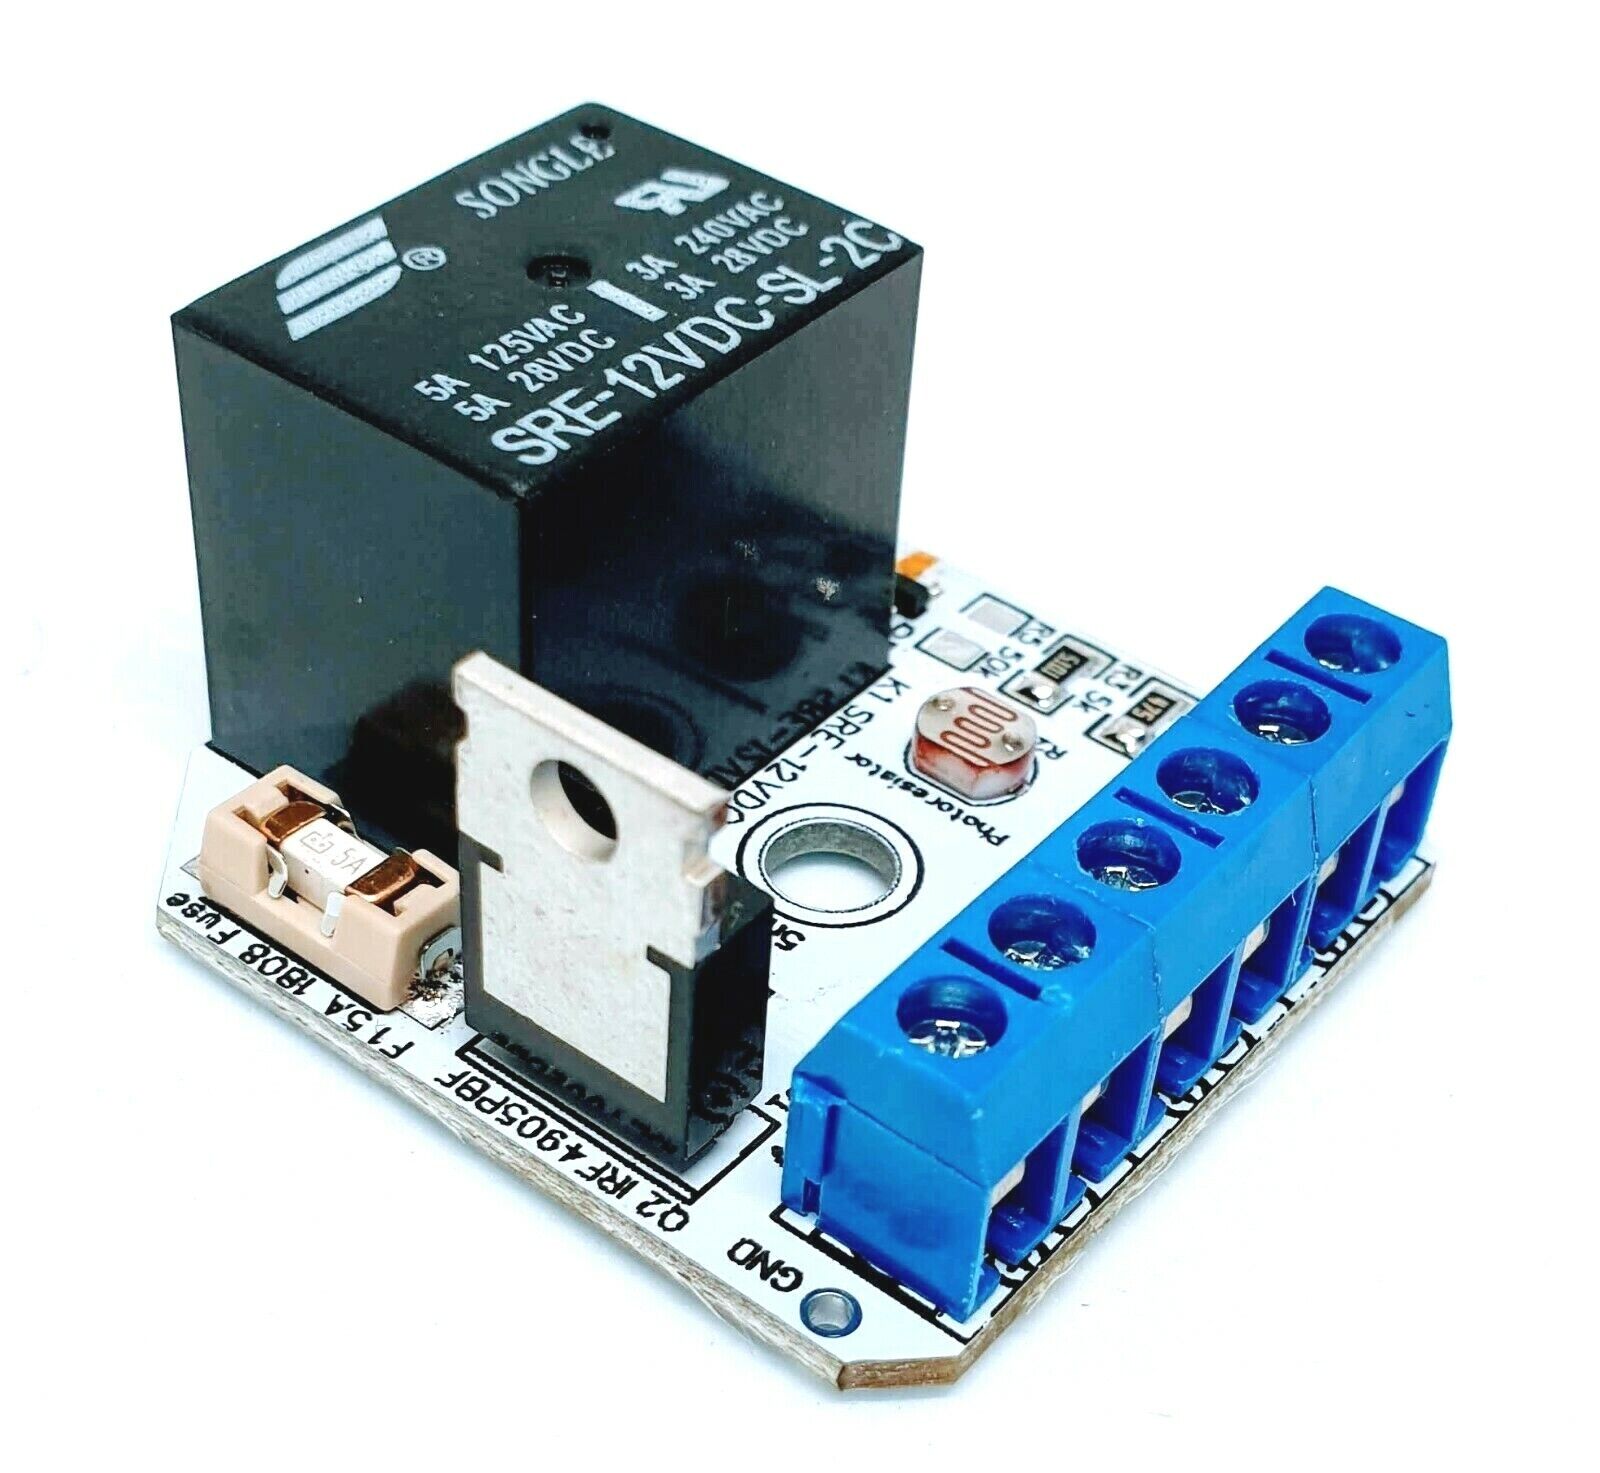 12V 5Amp West East Auto Sensor Night C DIY Industry No. 1 Sun Panel Tracking Industry No. 1 PV